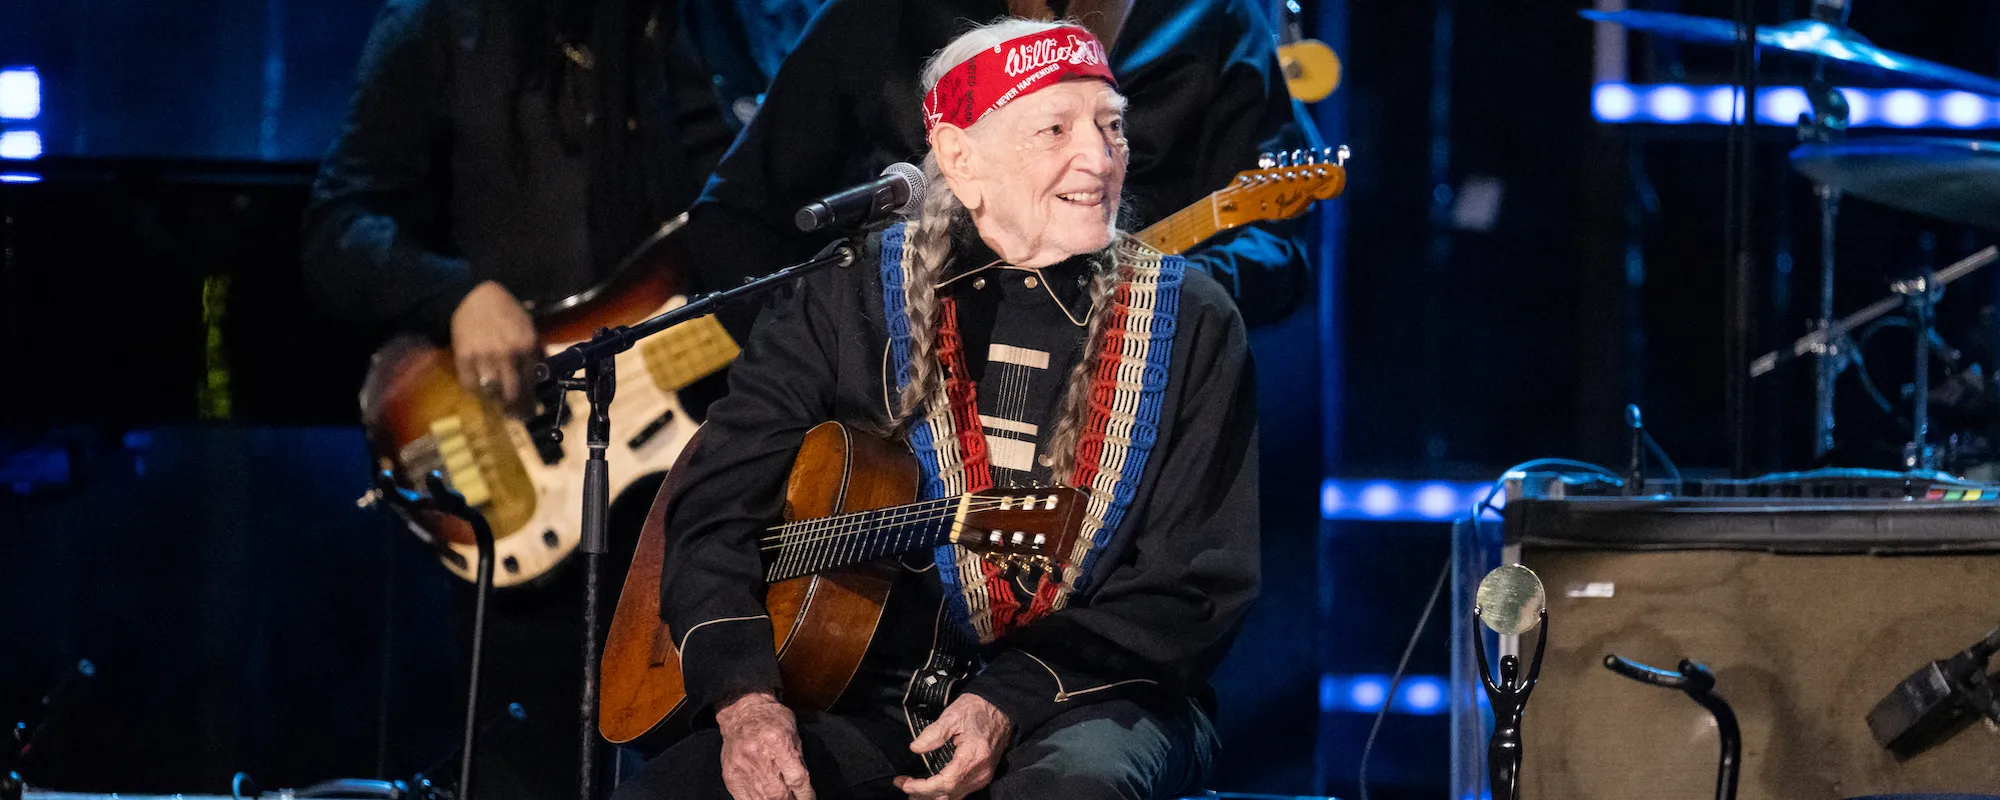 Watch: Willie Nelson Gets Inducted Into Rock & Roll Hall of Fame, Performs with Sheryl Crow, Chris Stapleton, and Dave Matthews